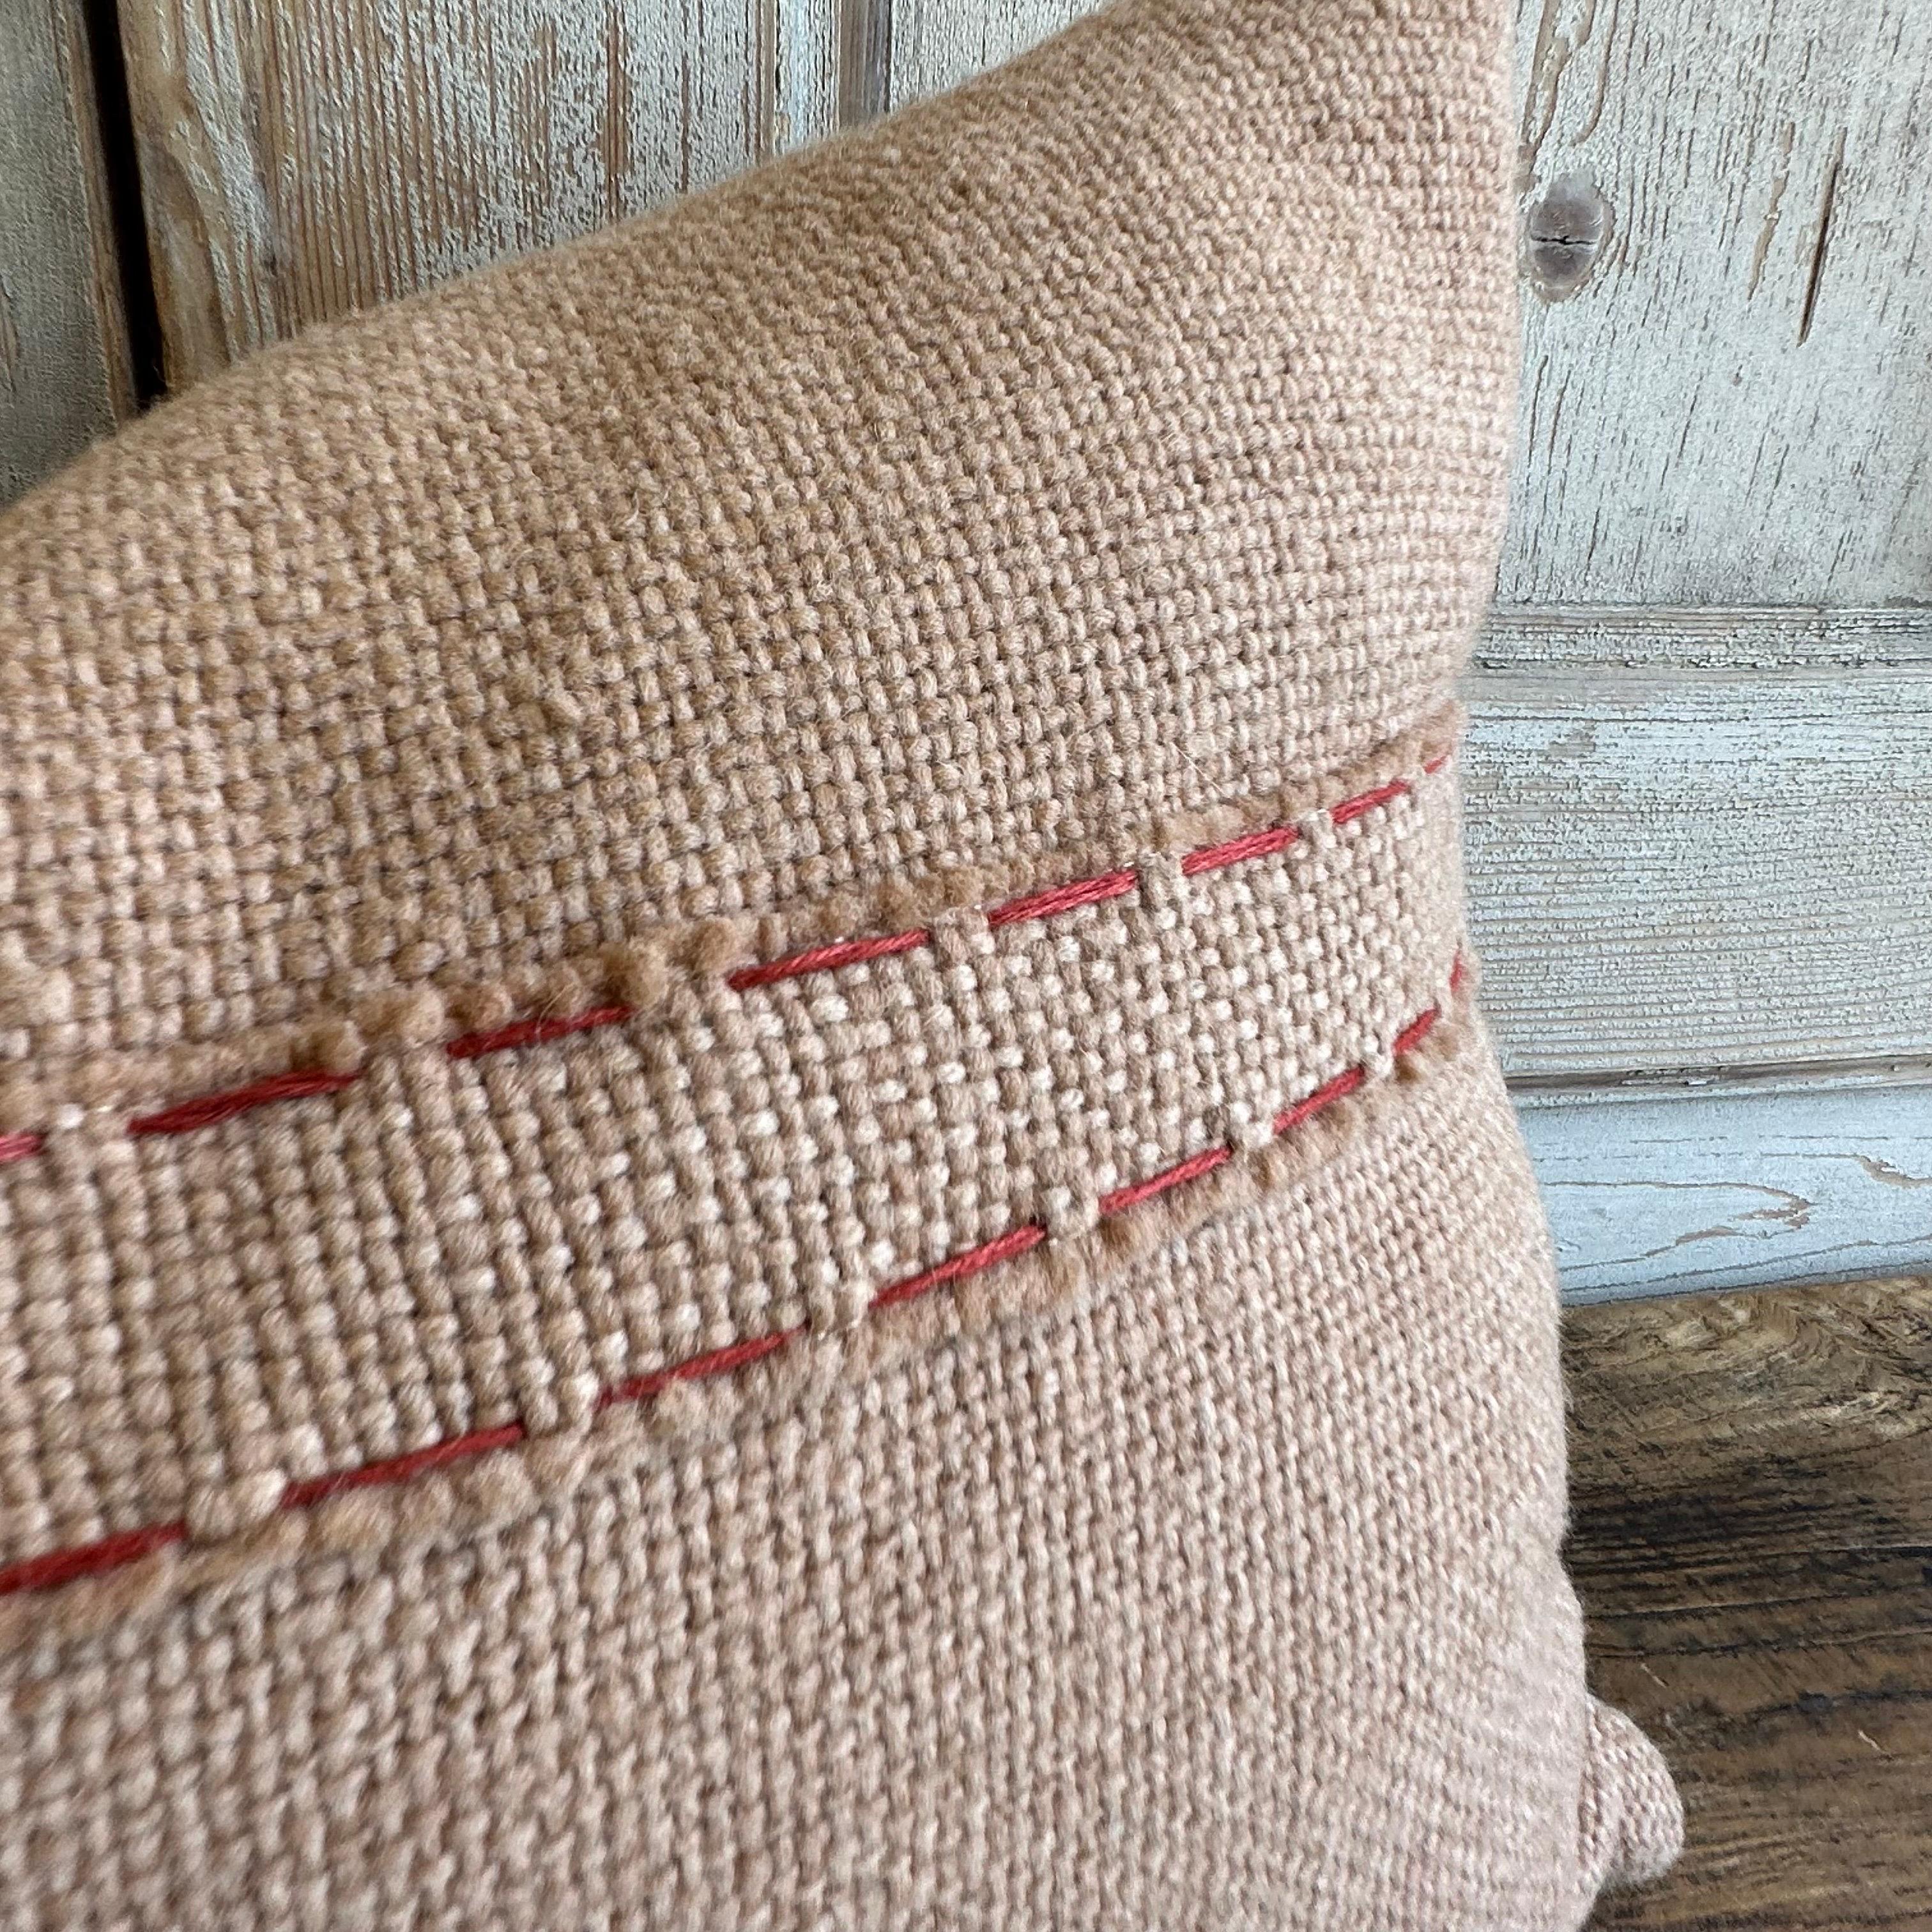 Mirna lumbar pillow
commissioned and handmade by the craftswomen of Chiloé. The textiles are made with 100% wool from ’Chilota’ sheep, that are born and raised on the island.?The process by which these luxurious wool pieces are made starts with